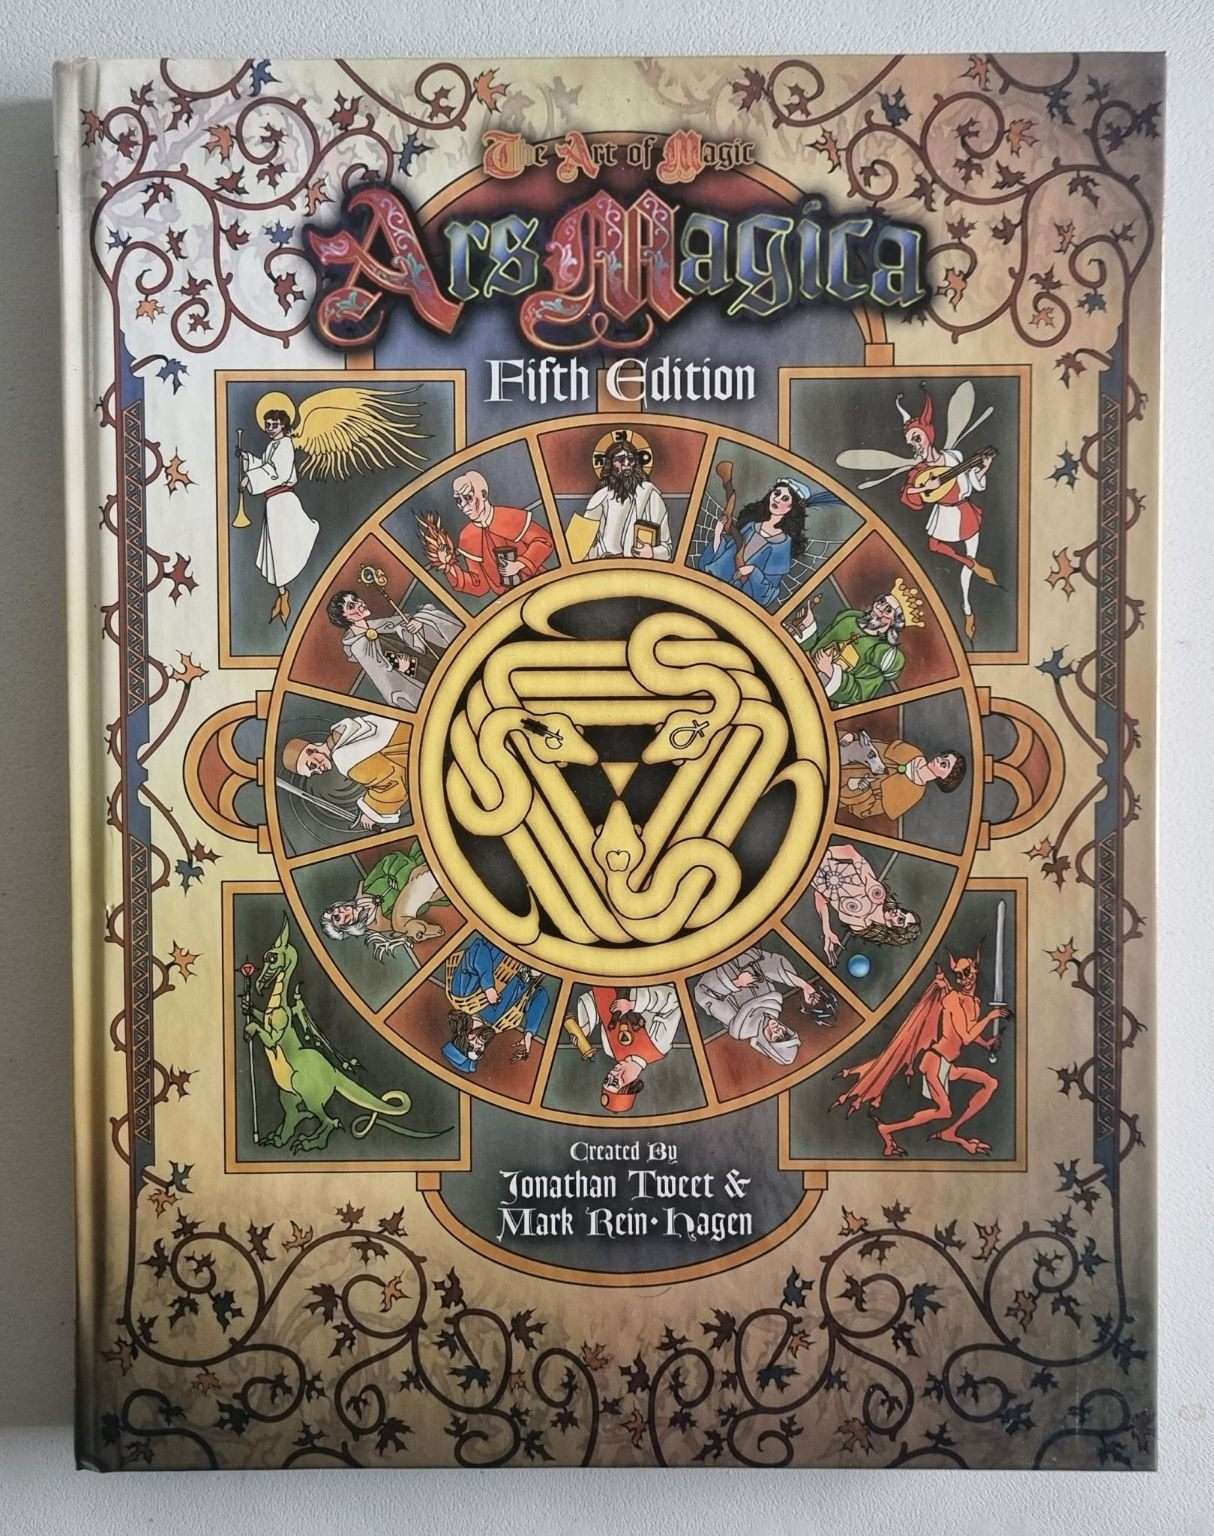 Ars Magica - The Art of Magica: Fifth Edition